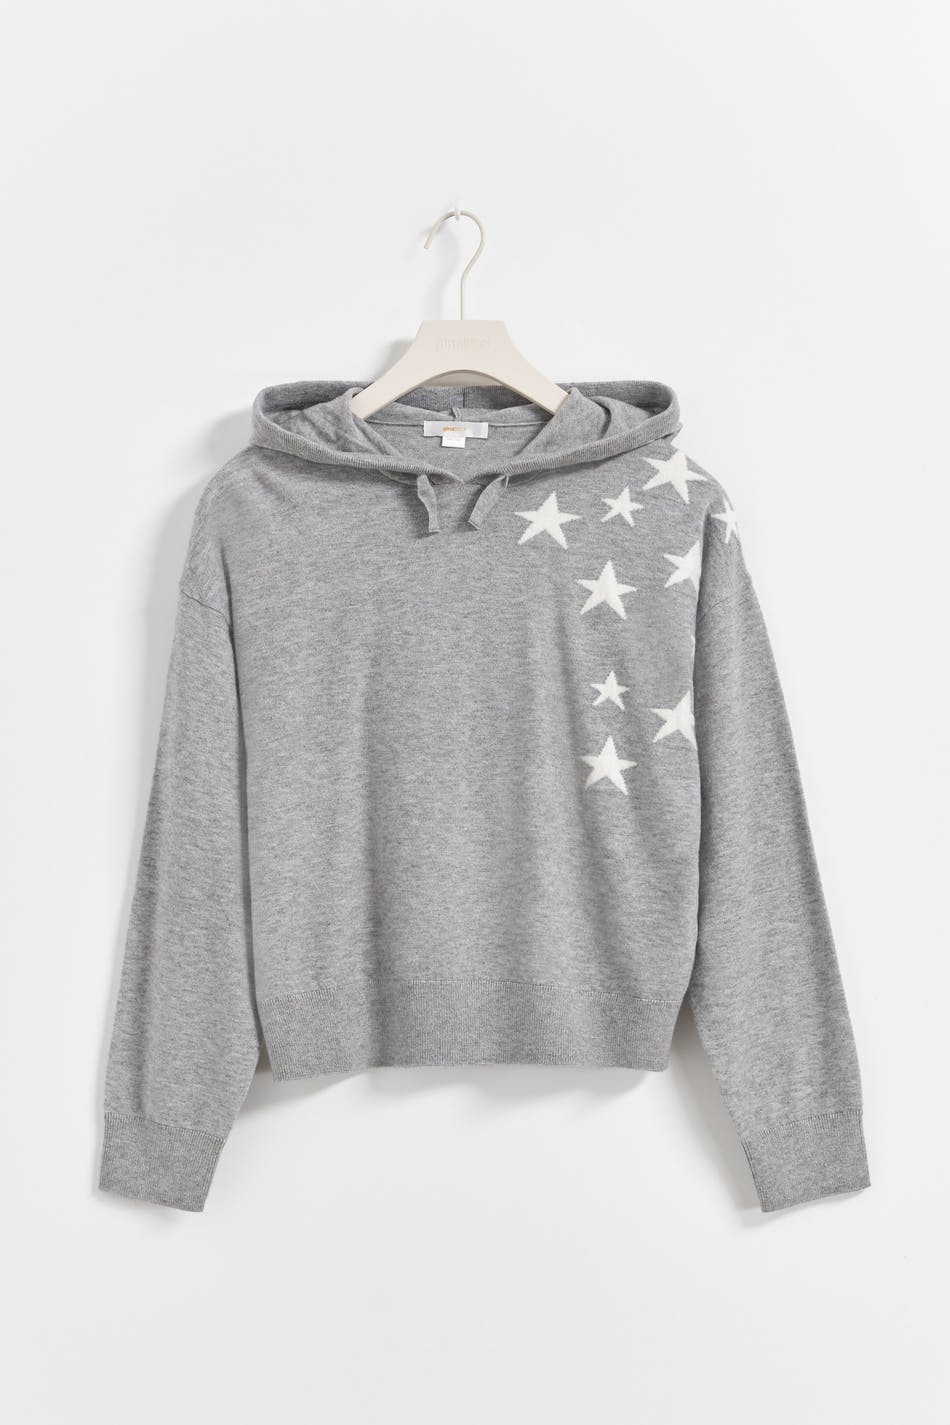 Gina Tricot - Y star knitted hoodie - young-tops - Grey - 170 - Female